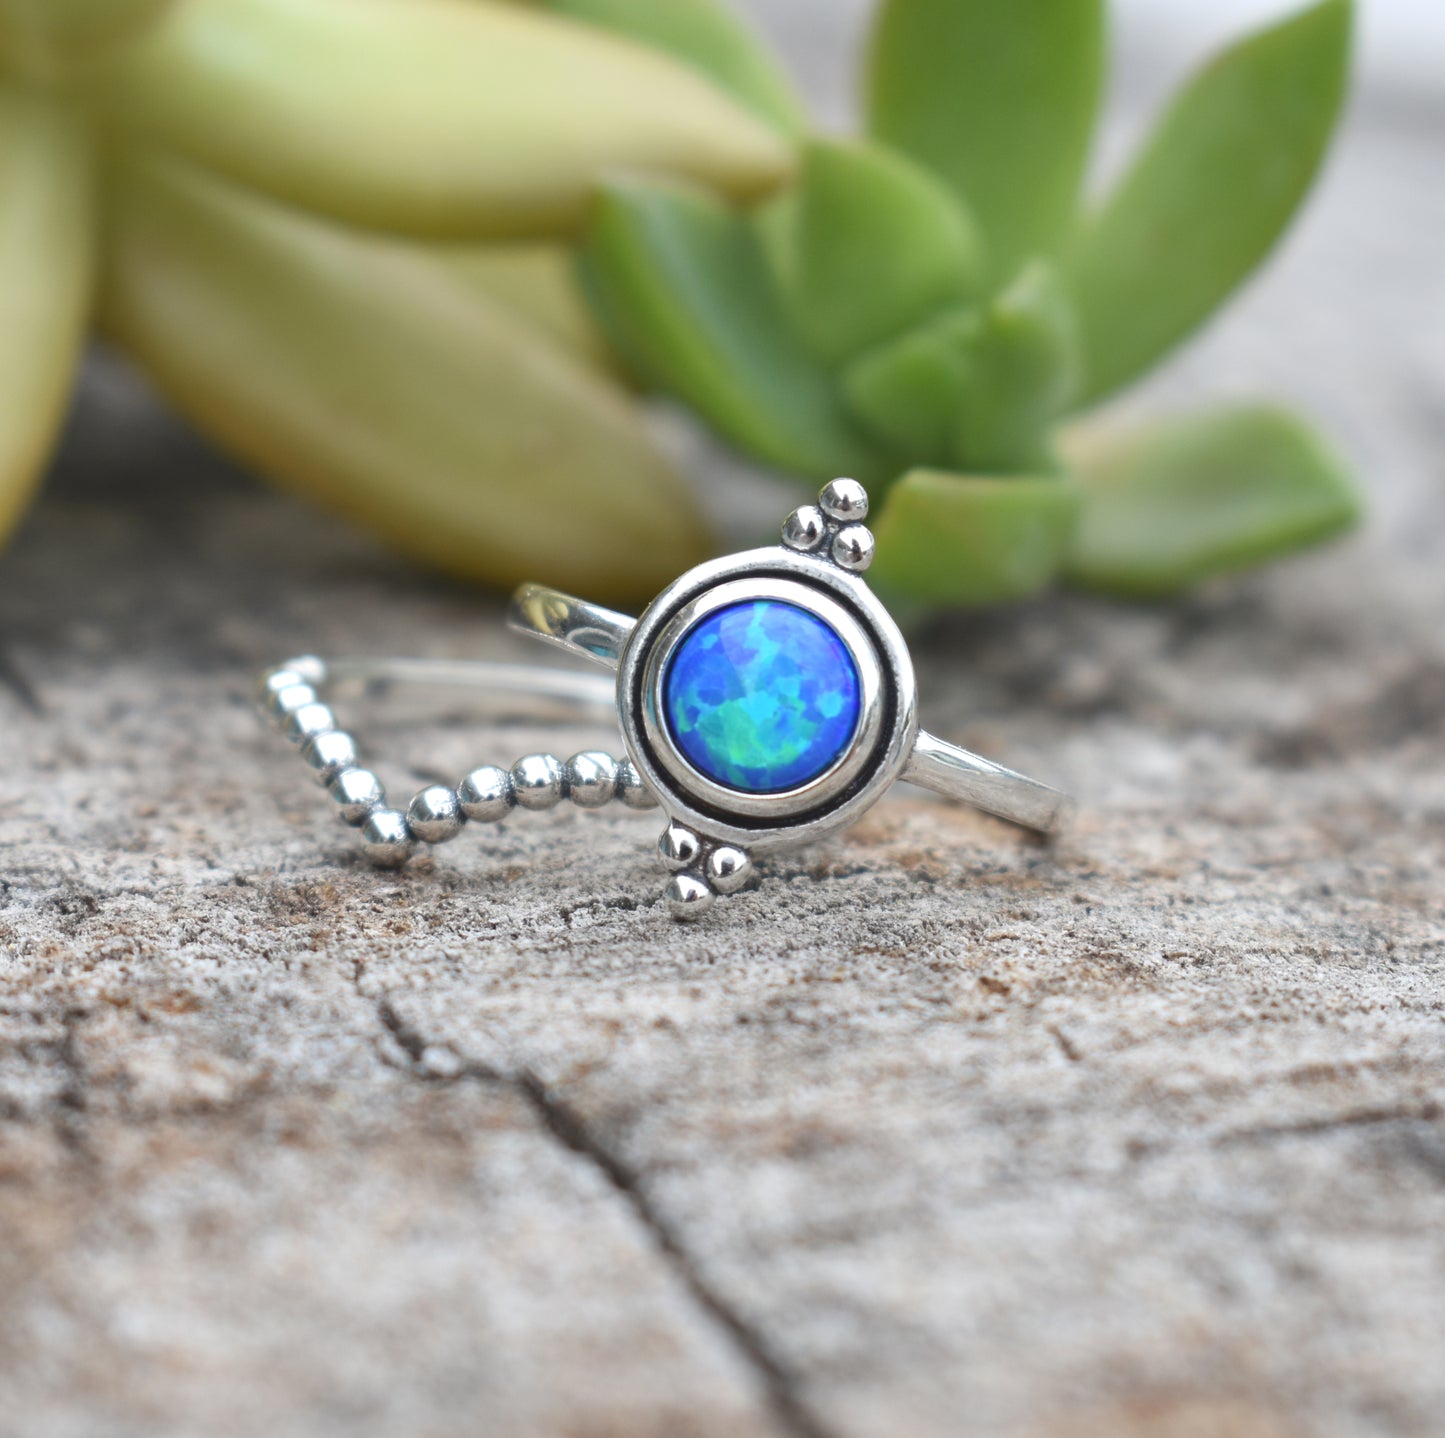 Blue Opal Engagement Ring- Opal Ring, October Birthstone- Sterling Silver